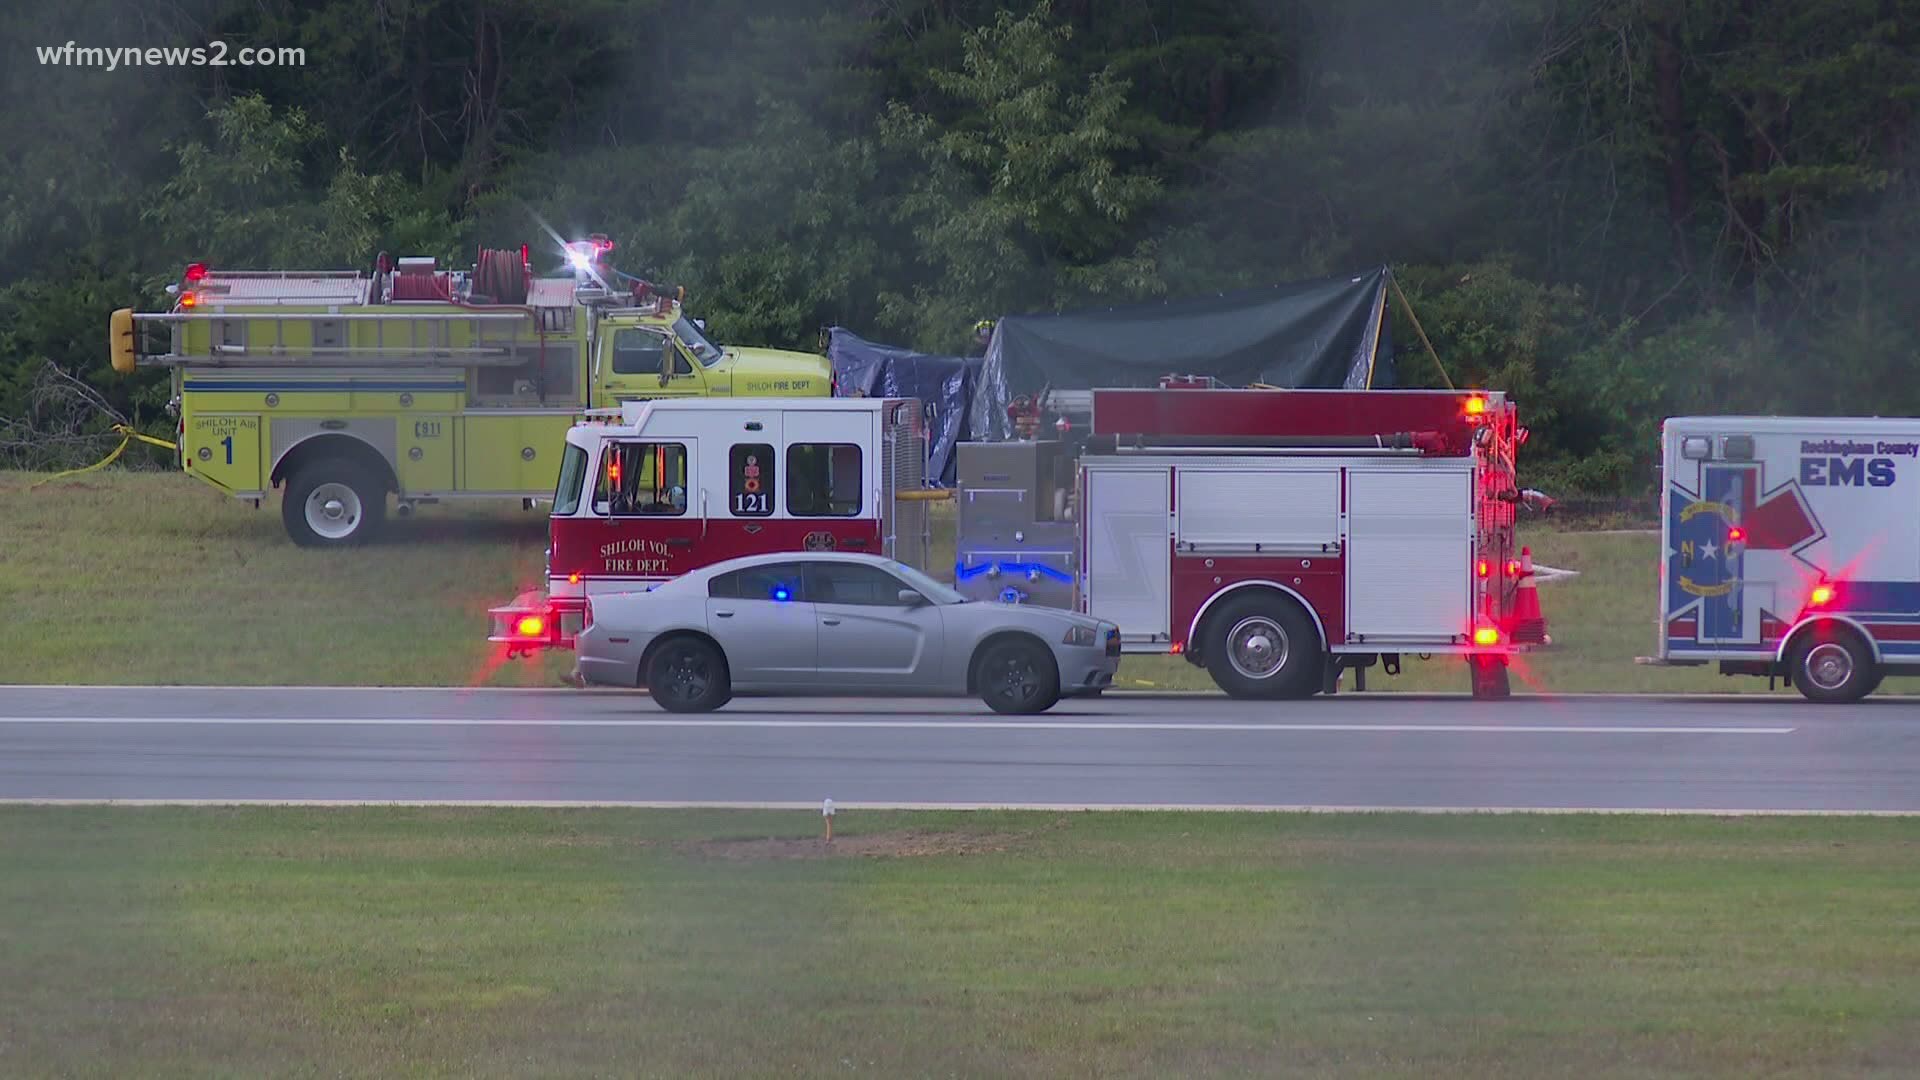 Only the pilot was onboard. The crash happened near Shiloh Airport in Stoneville.